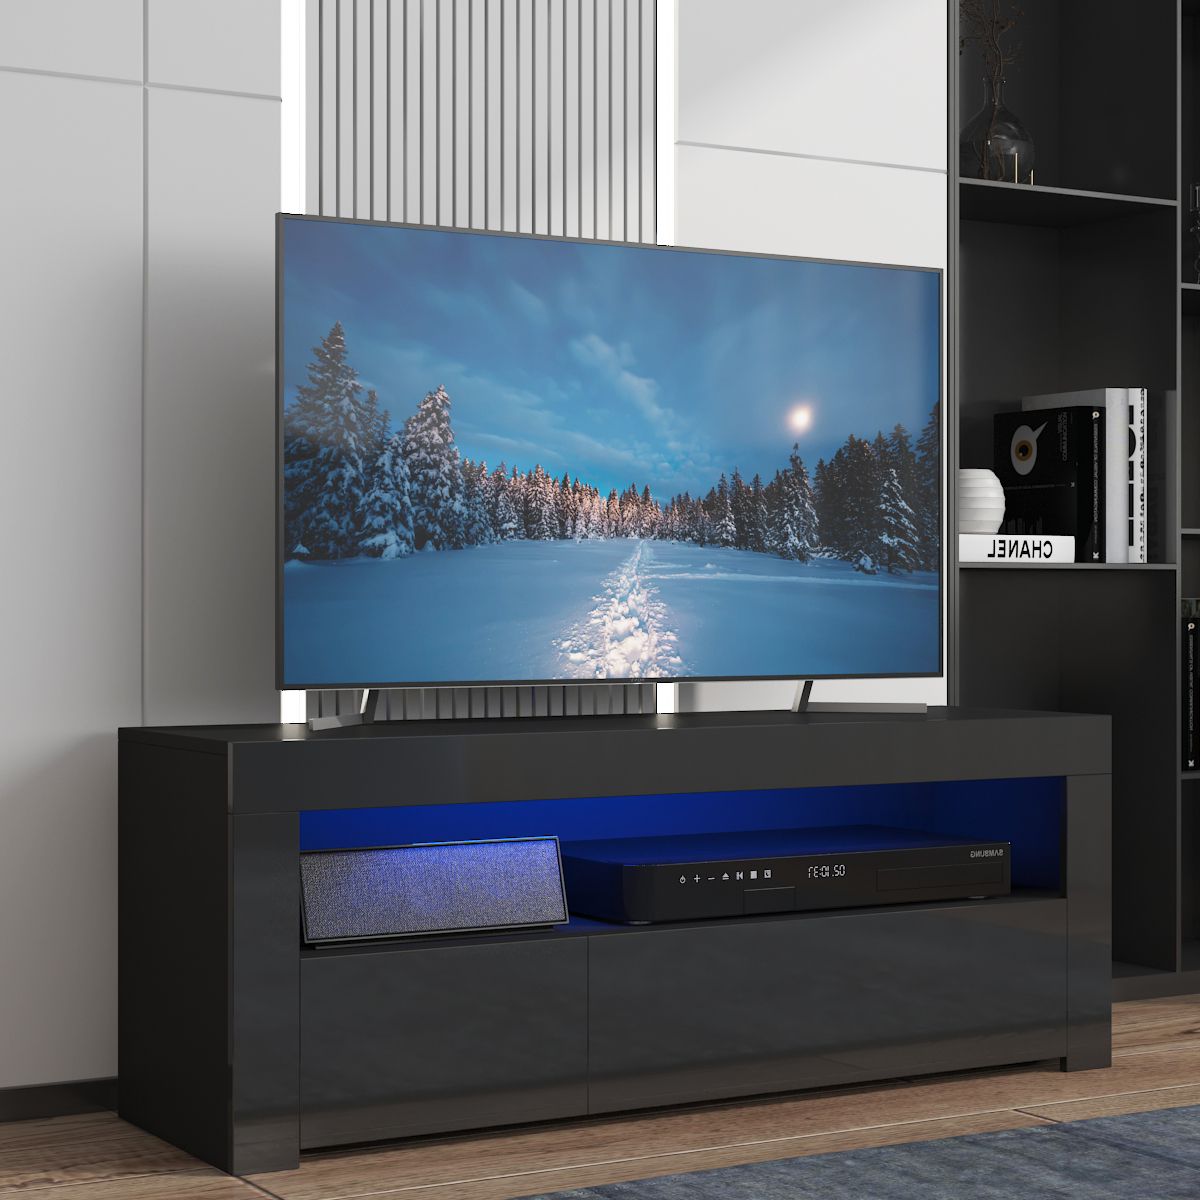 High Gloss Tv Stand For Tvs Up To 55'', With 16 Color Led For Ktaxon Modern High Gloss Tv Stands With Led Drawer And Shelves (Gallery 19 of 20)